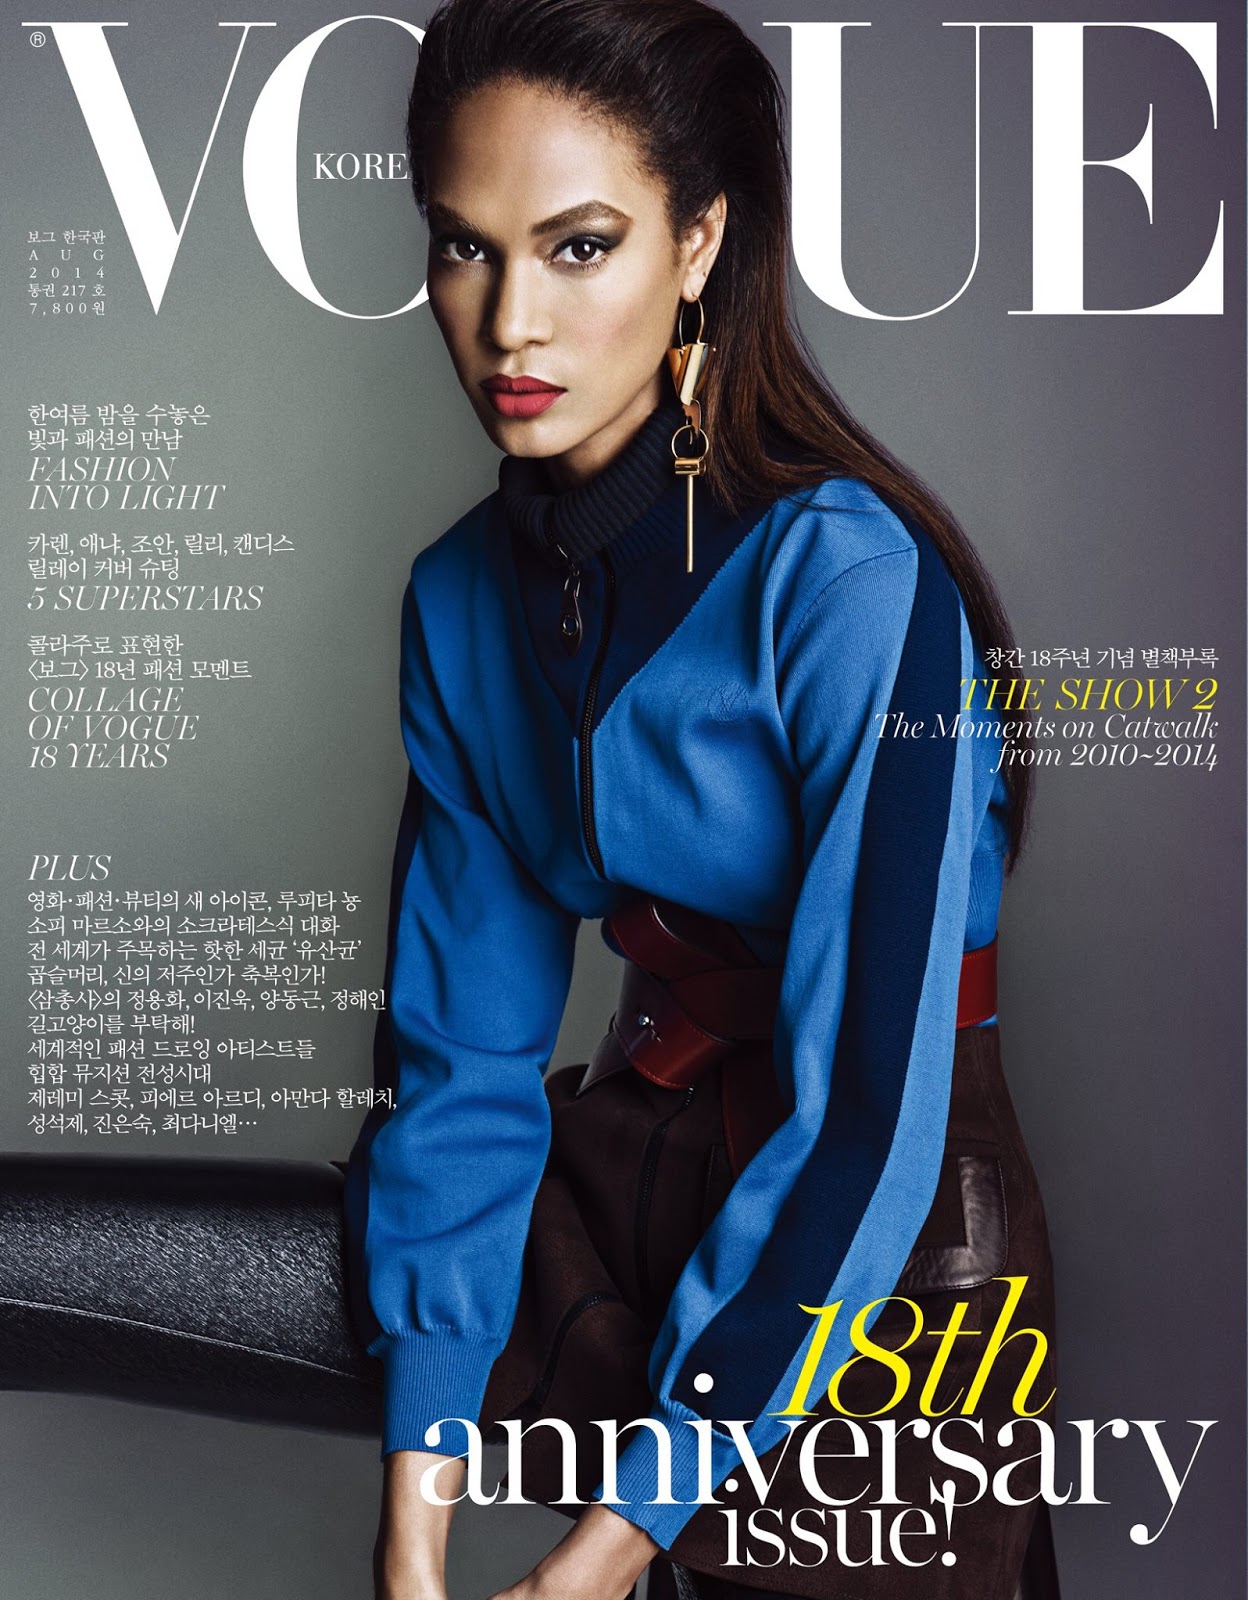 Joan Smalls in Louis Vuitton on Vogue Italia May 2022 cover by Cho Giseok -  fashionotography